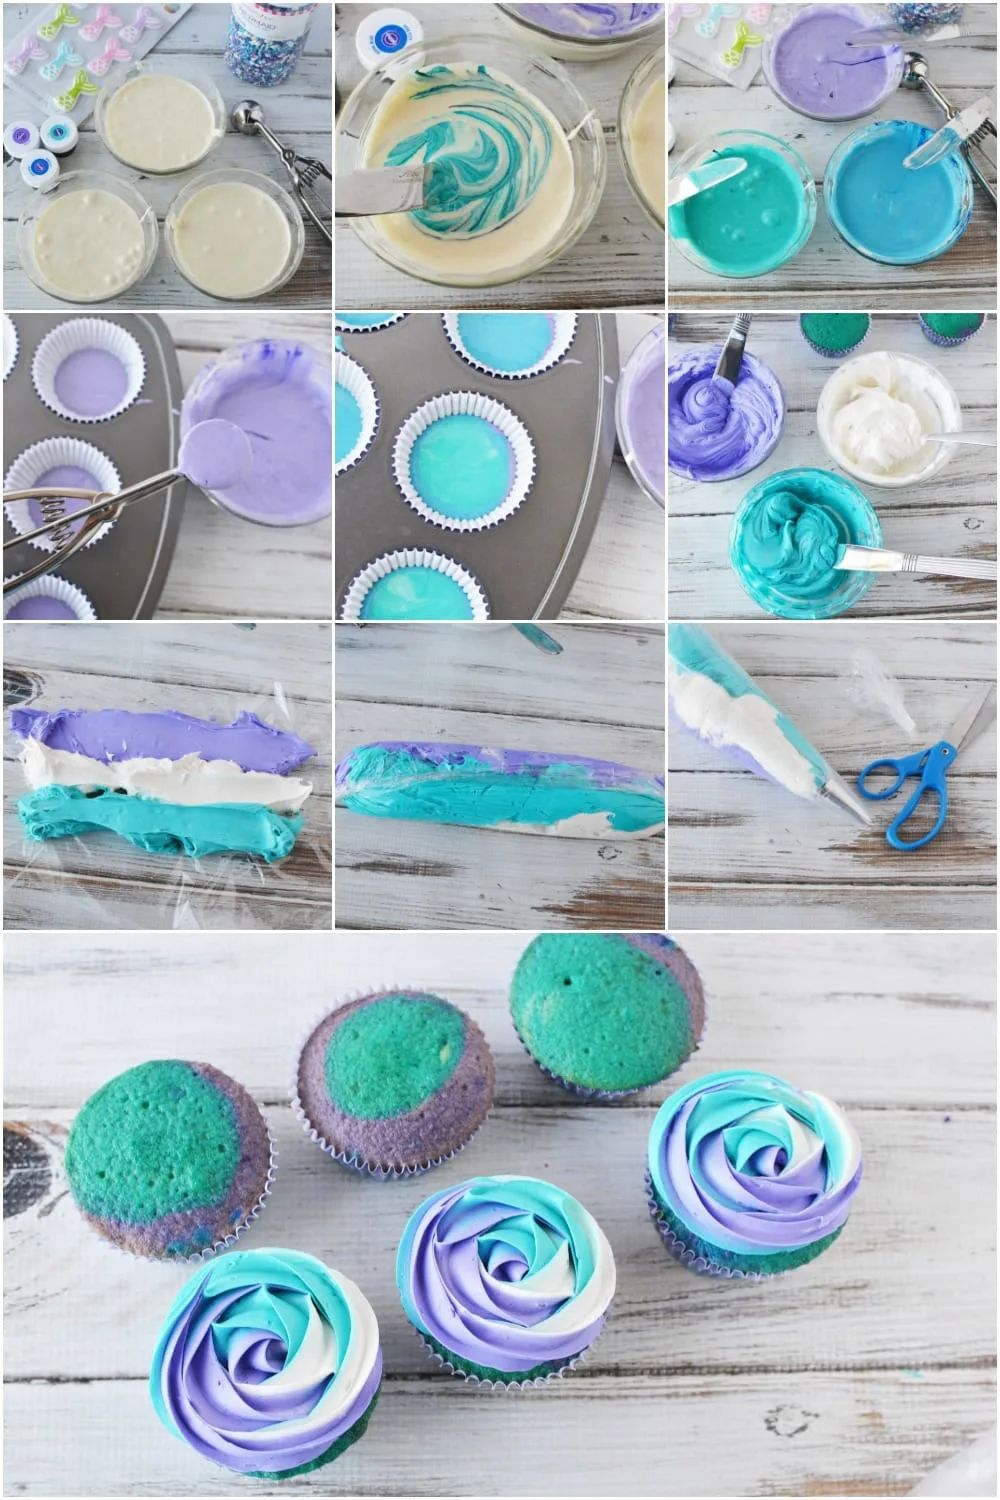 Collage of steps to make mermaid cupcakes. Includes swirled cake mix in purple, blue, and white. 